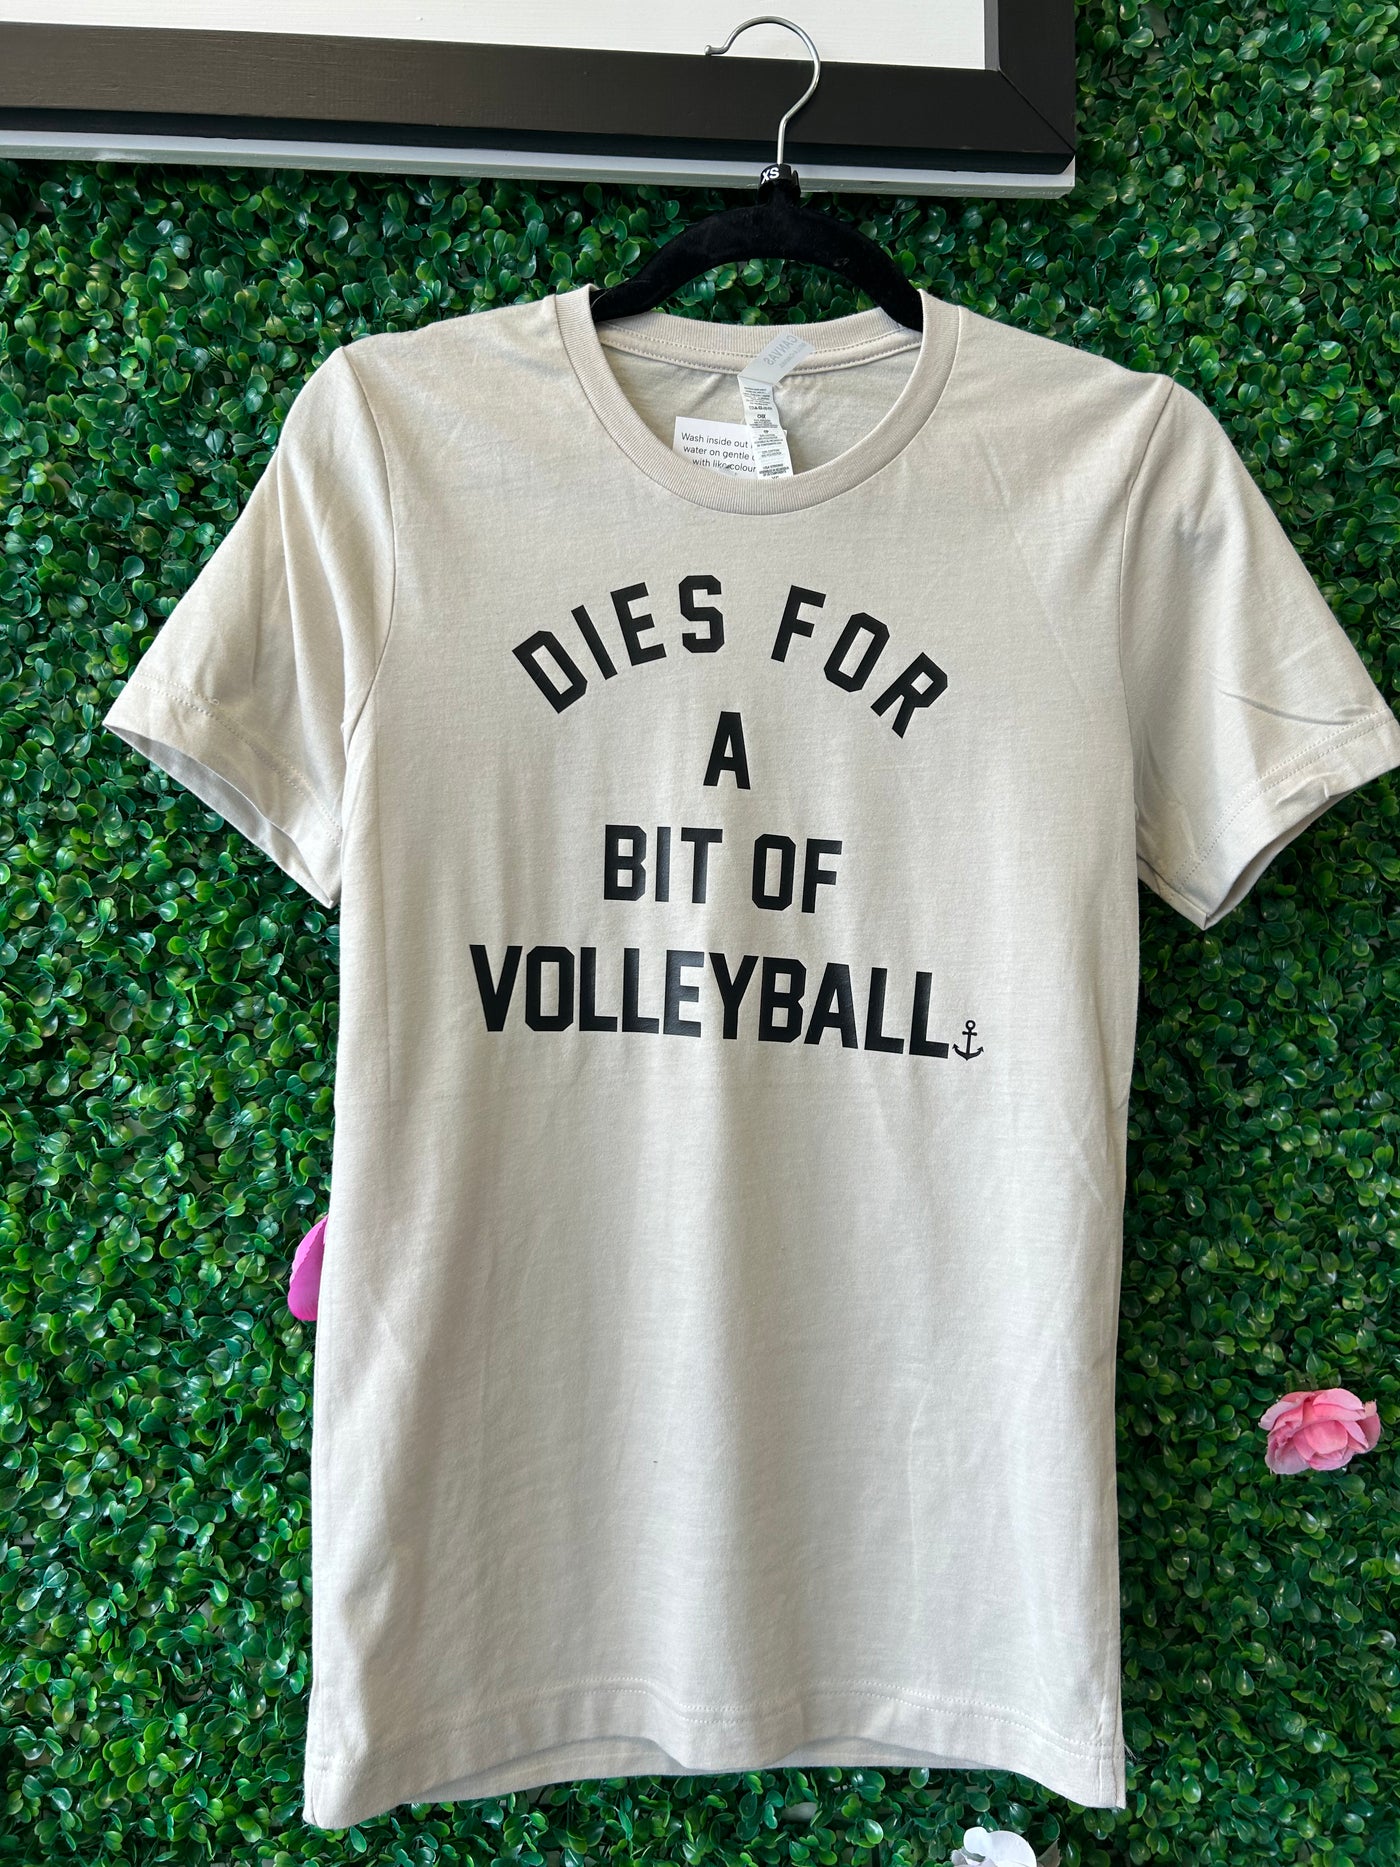 *CLEARANCE* “Dies For a Bit of Volleyball" Unisex T-Shirt  - Sand Beige - Size Adult XS